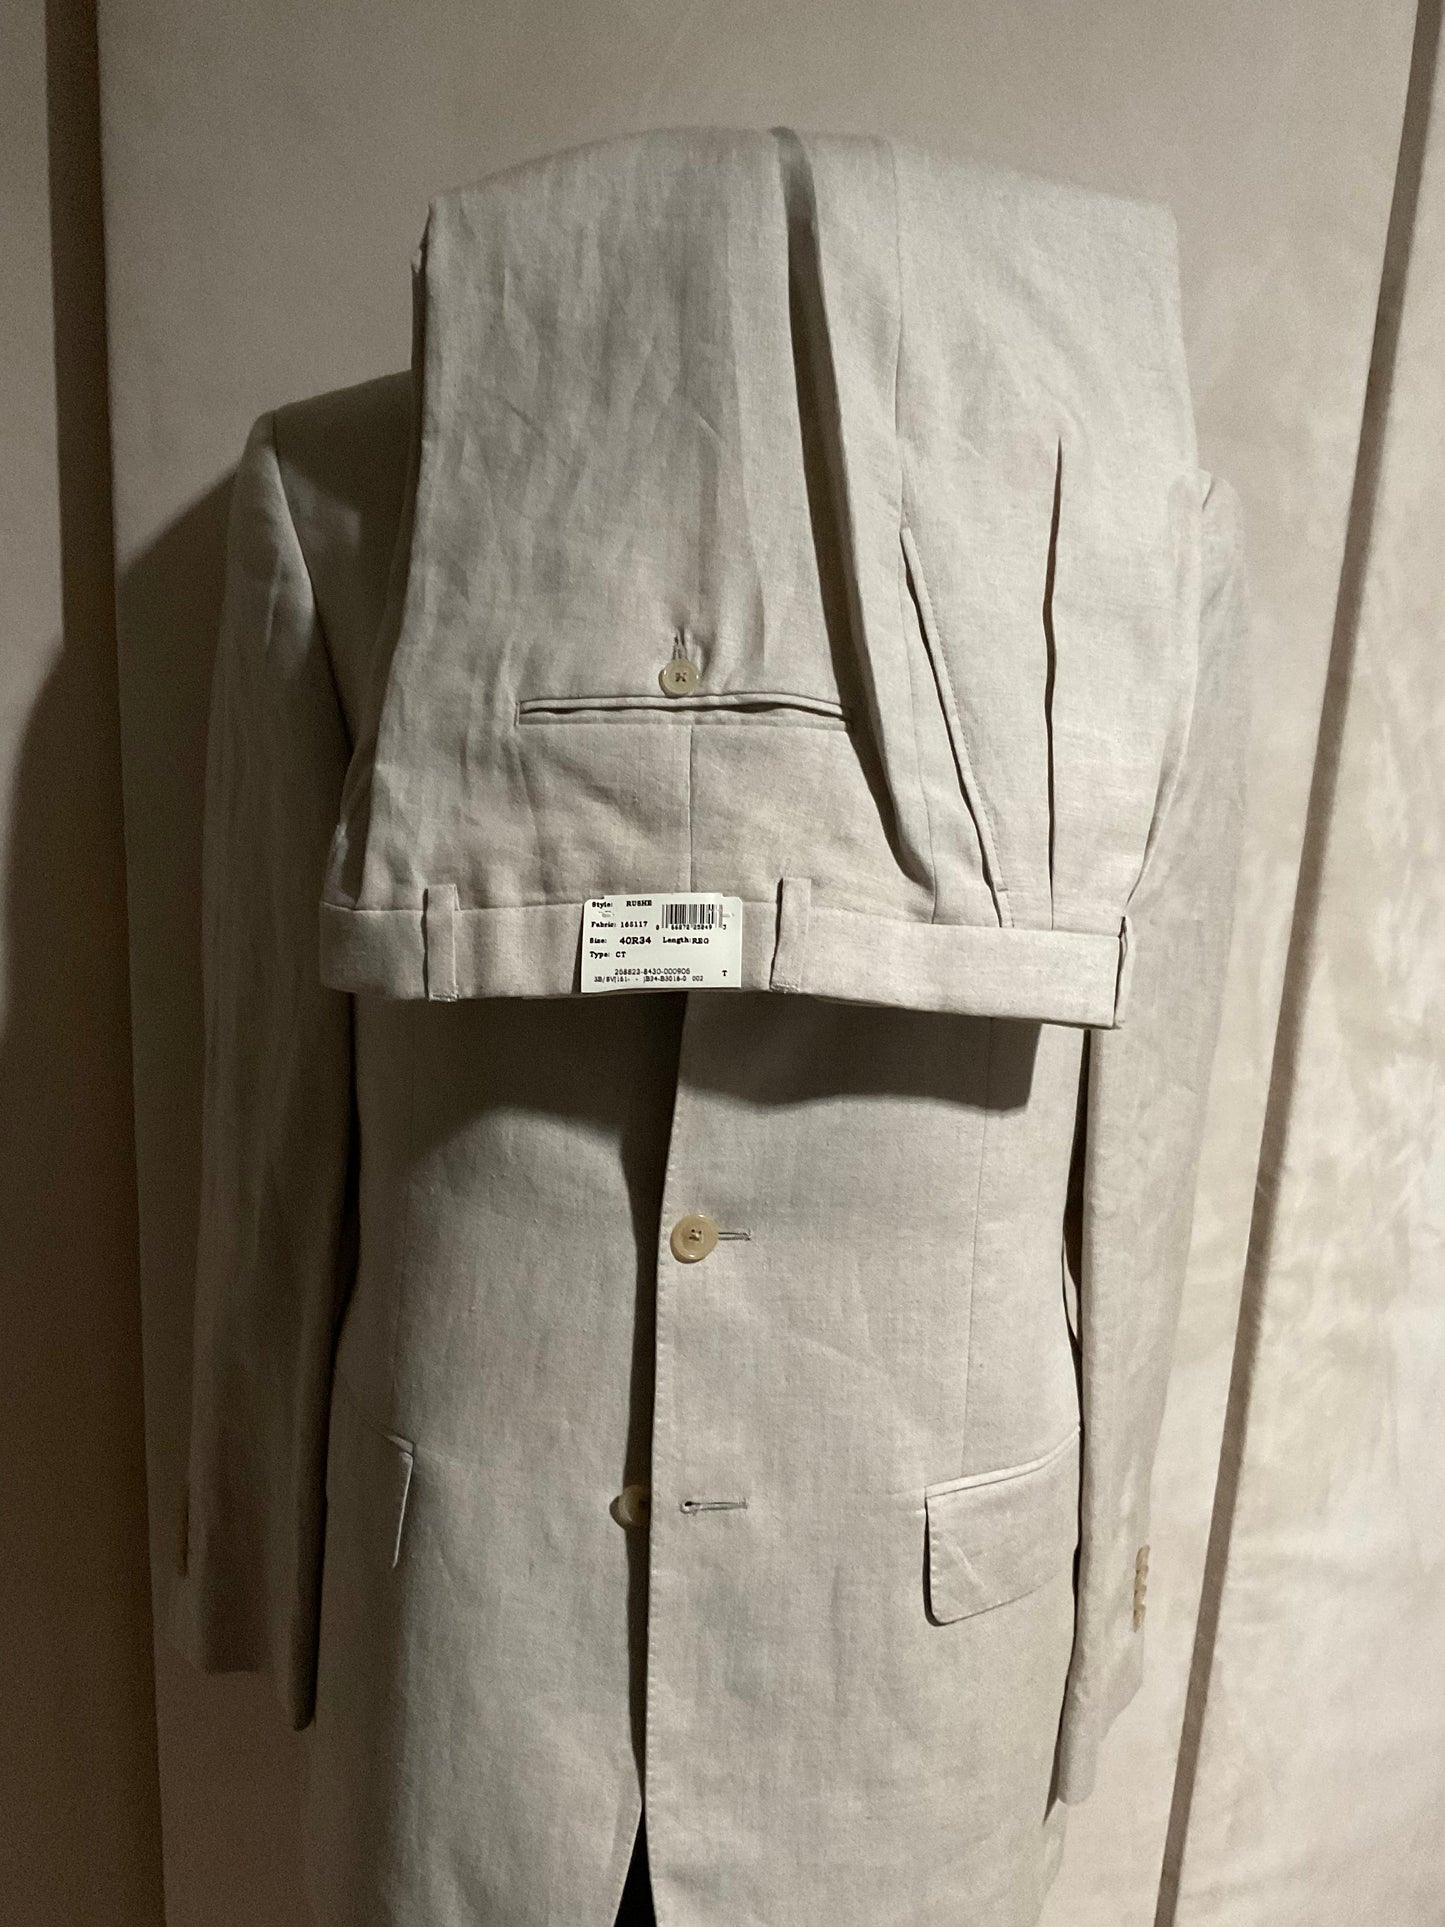 R P SUIT / BEIGE NATURAL LINEN / 3 PIECE VESTED / 40 REG / NEW / MADE IN CANADA